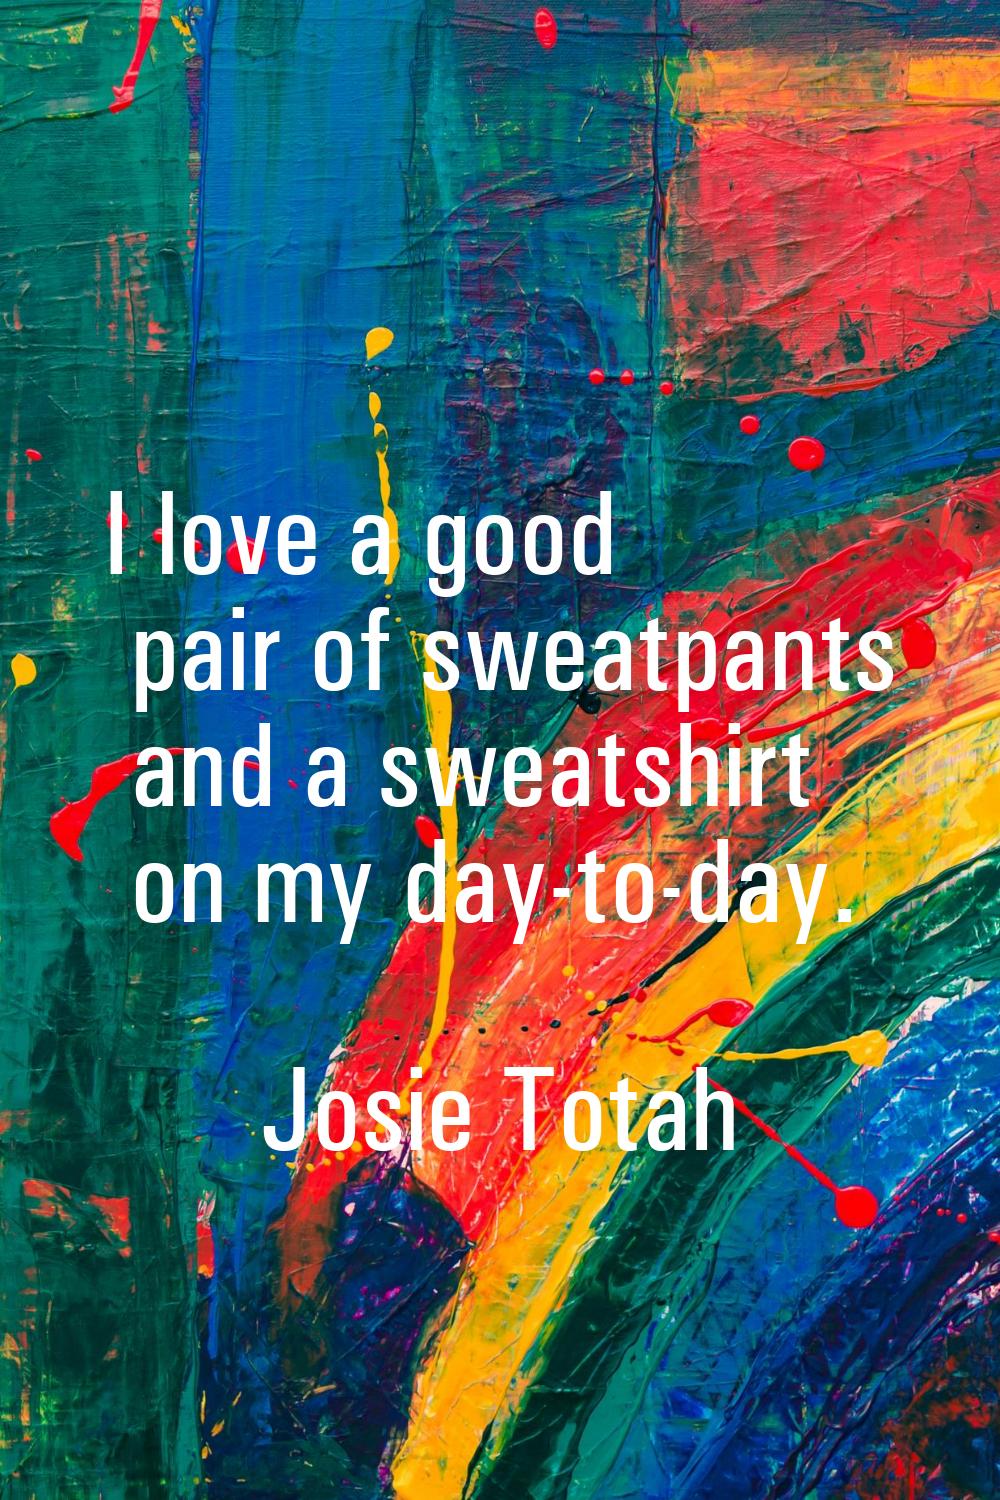 I love a good pair of sweatpants and a sweatshirt on my day-to-day.